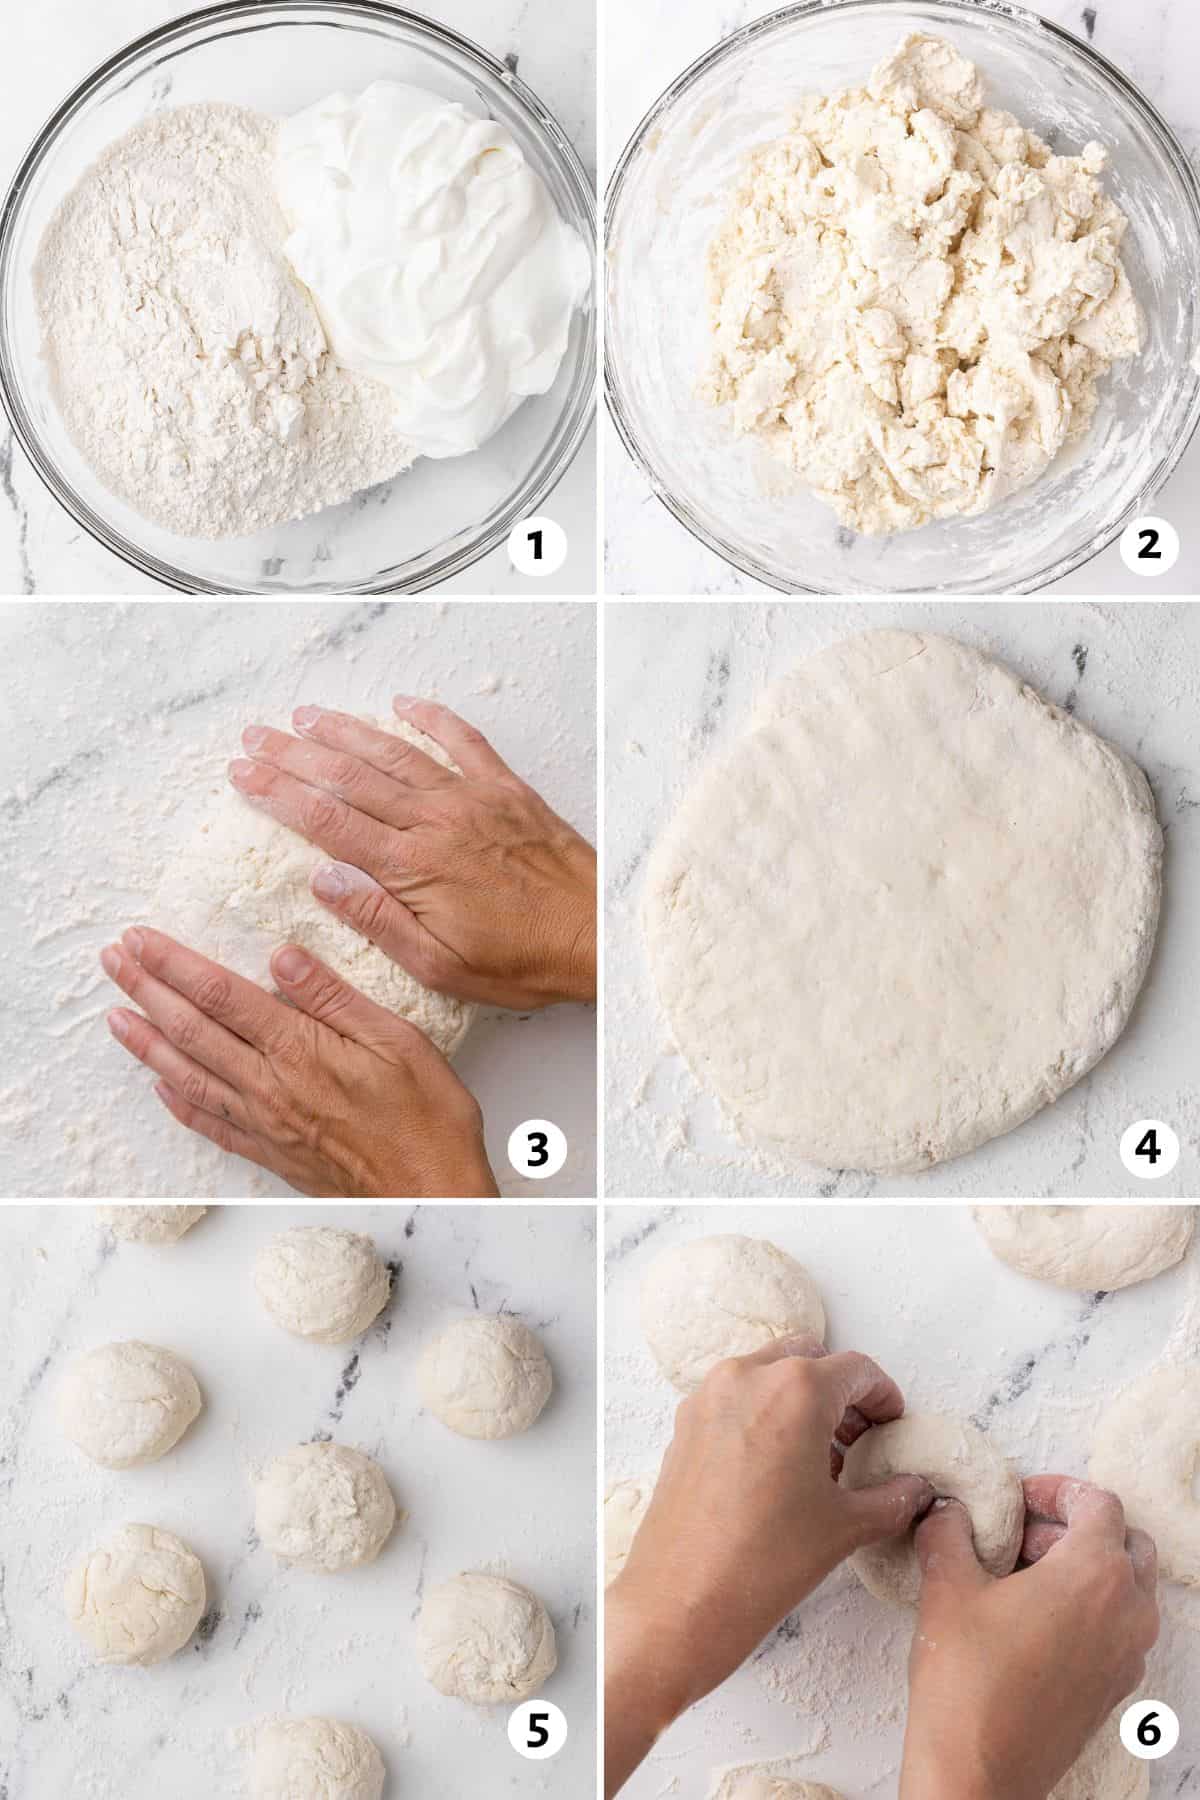 6 image collage making recipe: 1- yogurt and flour in a bowl, 2- after mixing to show shaggy dough, 3- hands kneading dough on a floured surface, 4- dough flattened into a smooth disc, 5- dough after resting and shaped into equal size balls, 6- hand shaping one dough ball into a bagel.